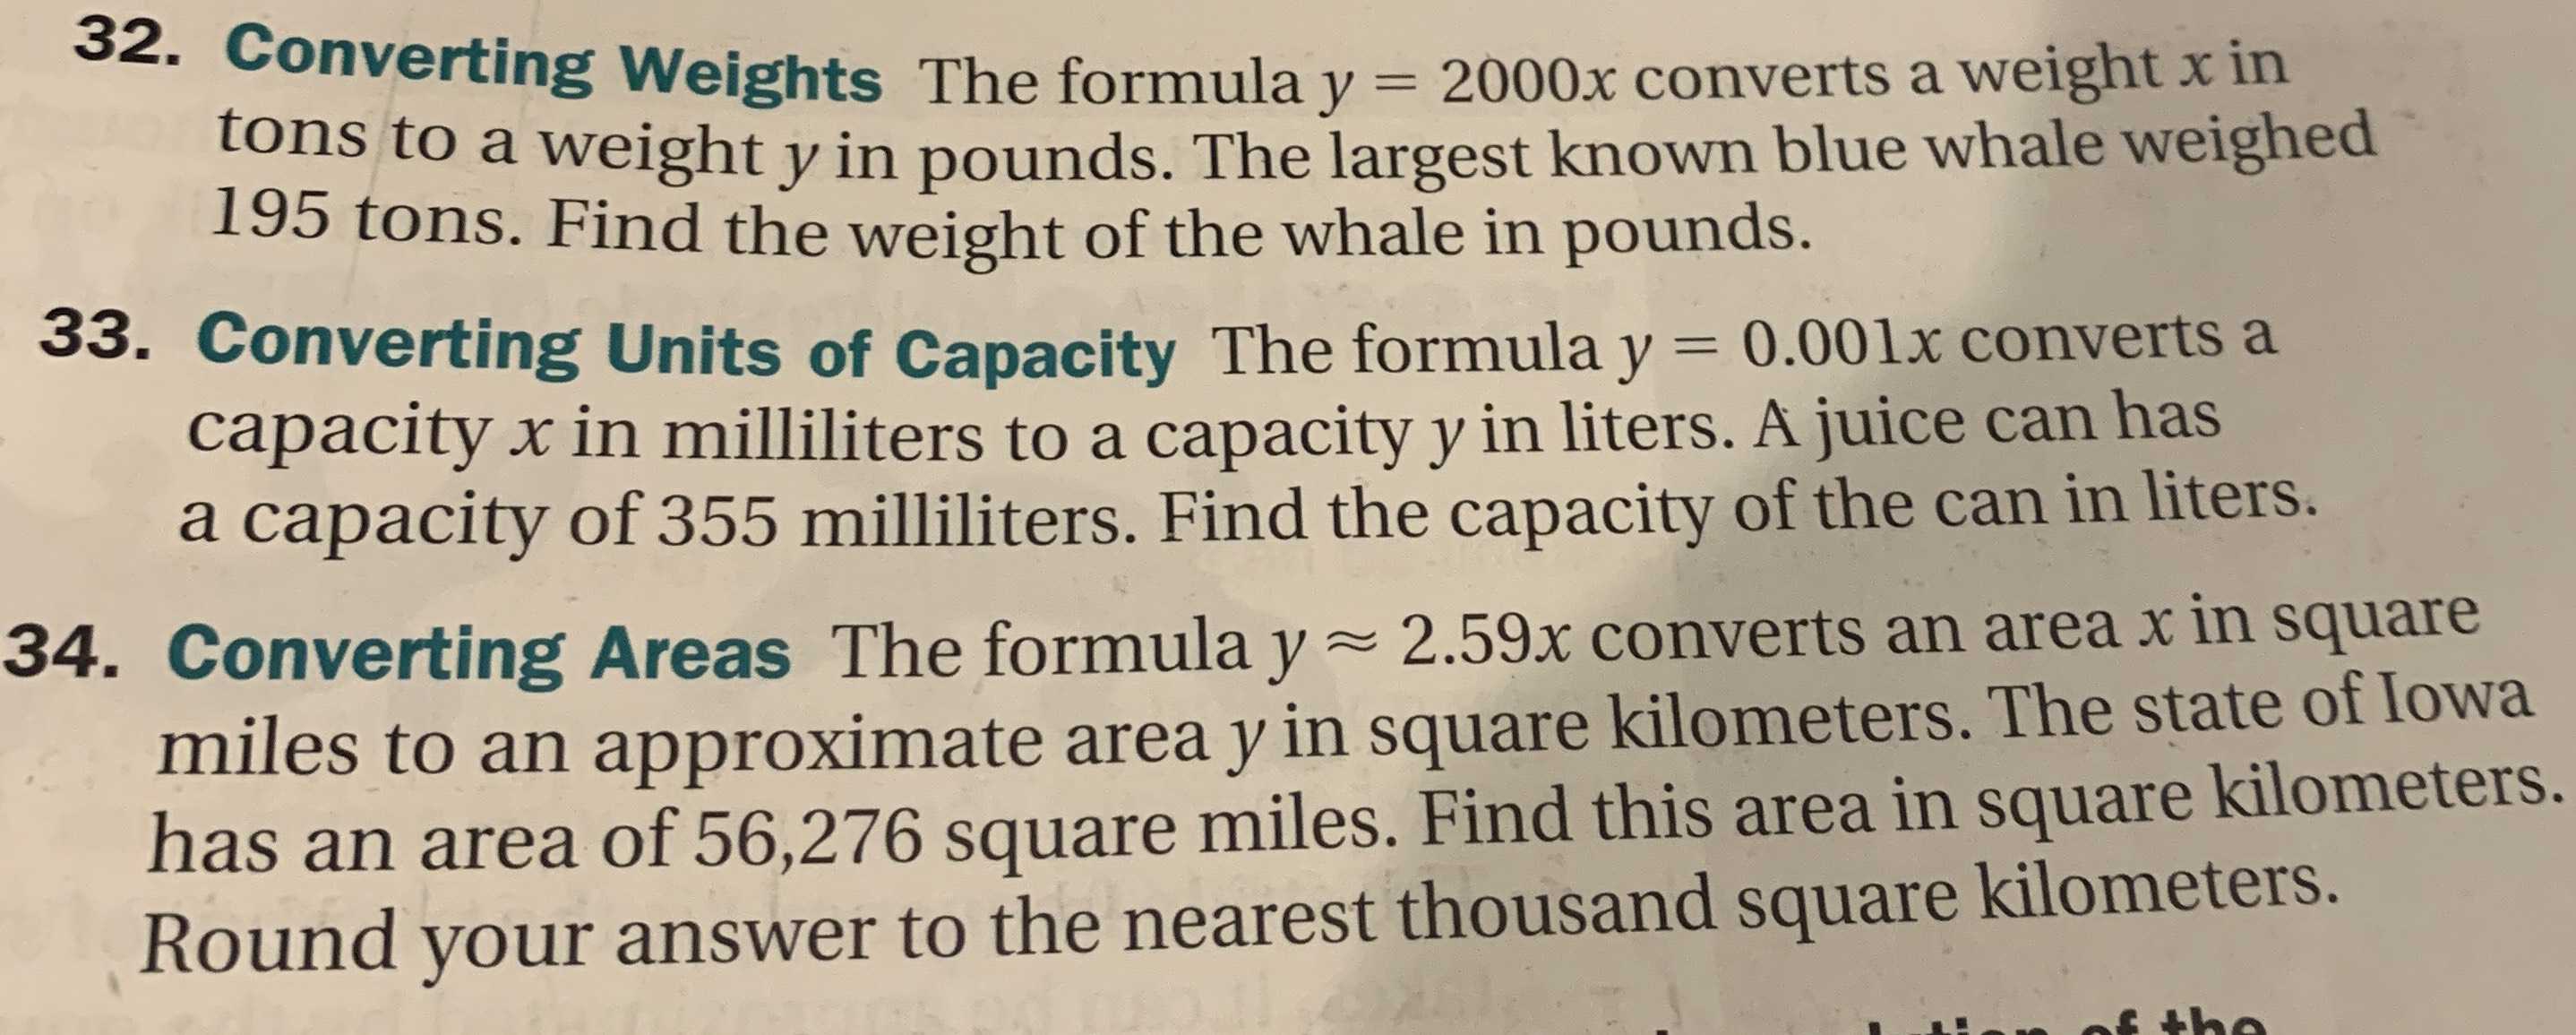 32. Converting Weights The formula \( y = 2000 x \...